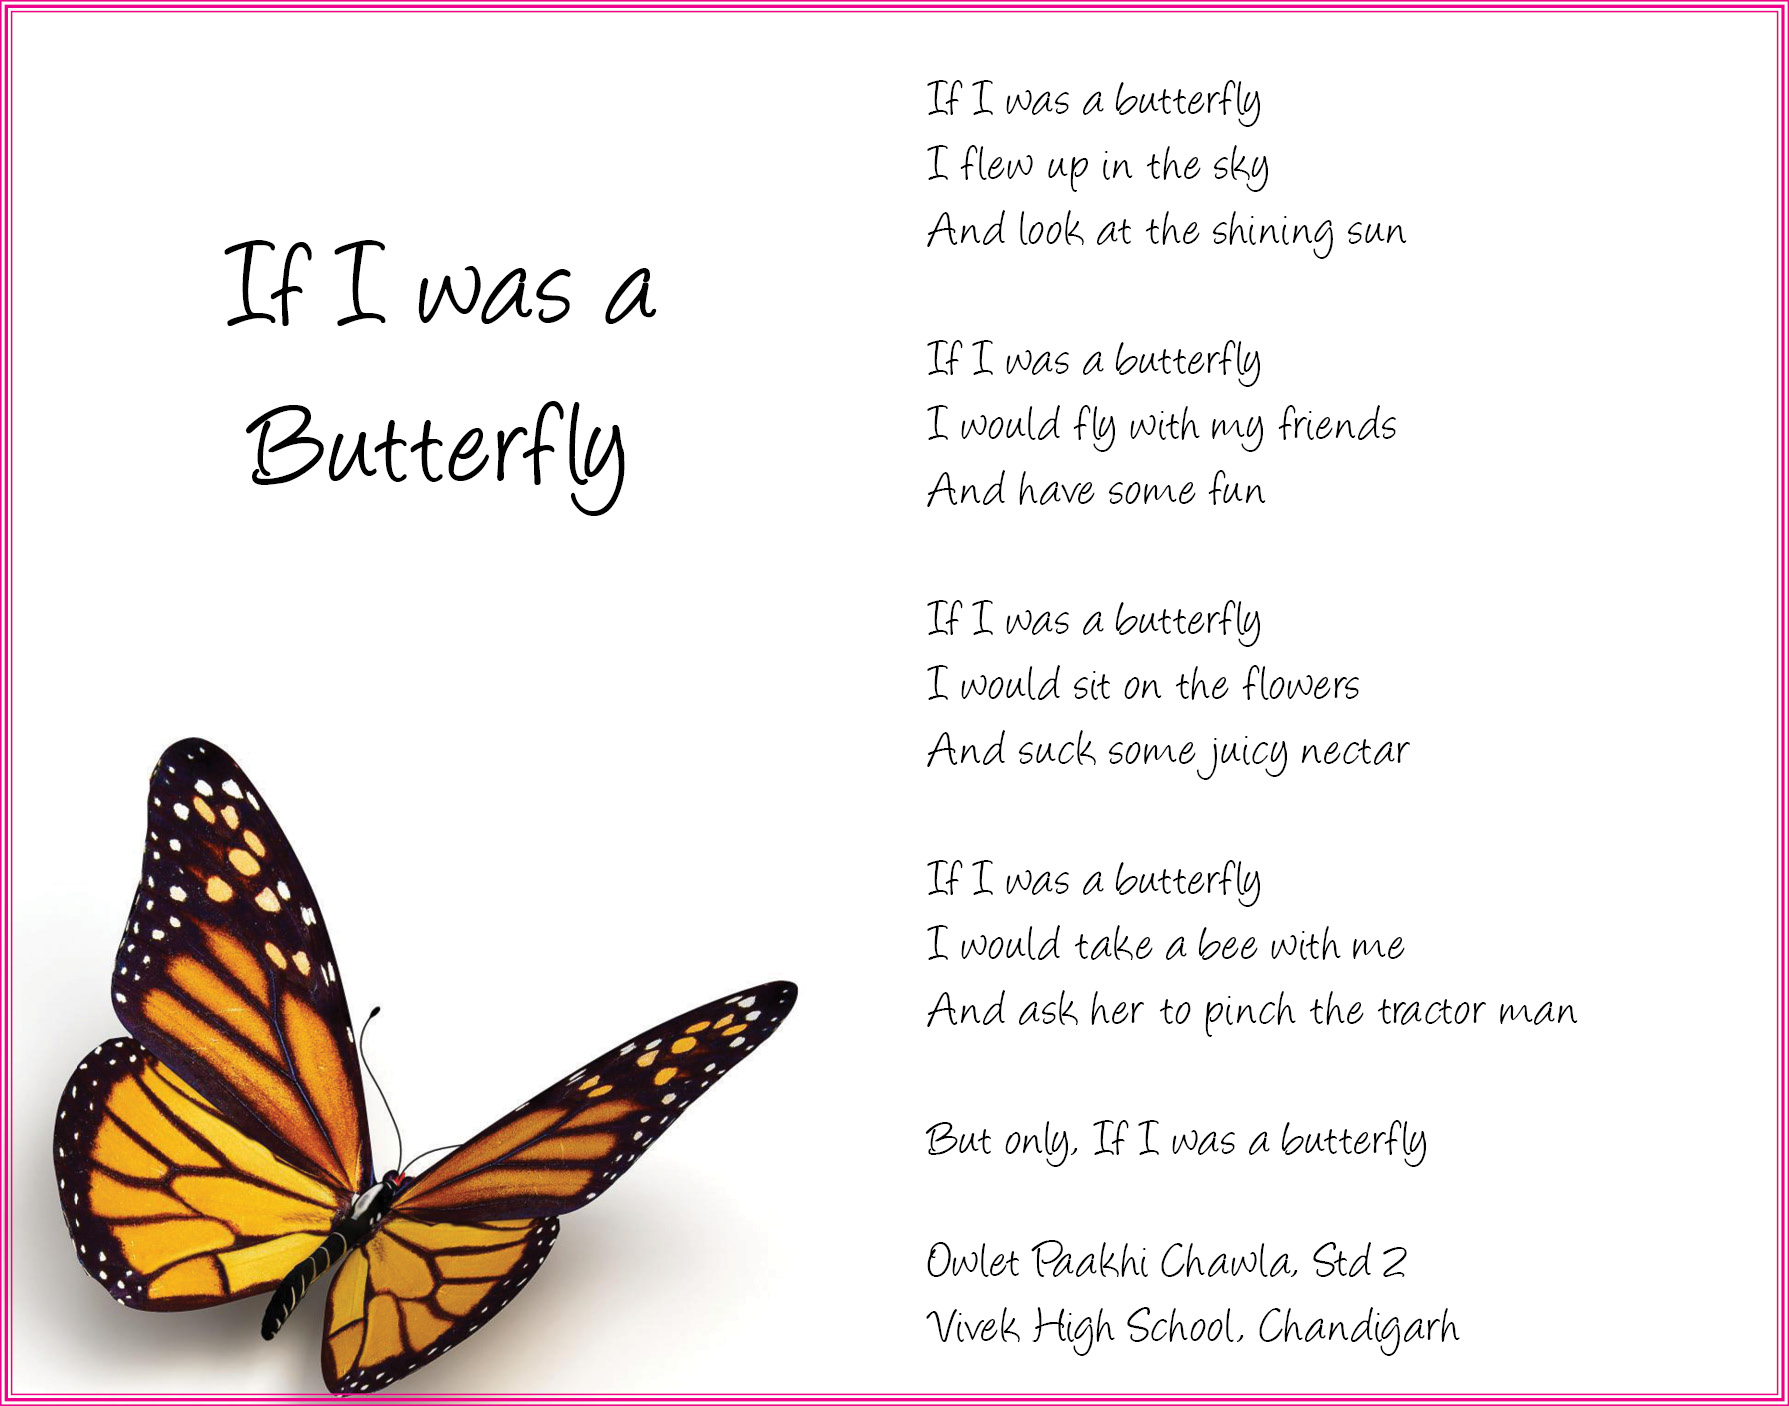 If I was a Butterfly